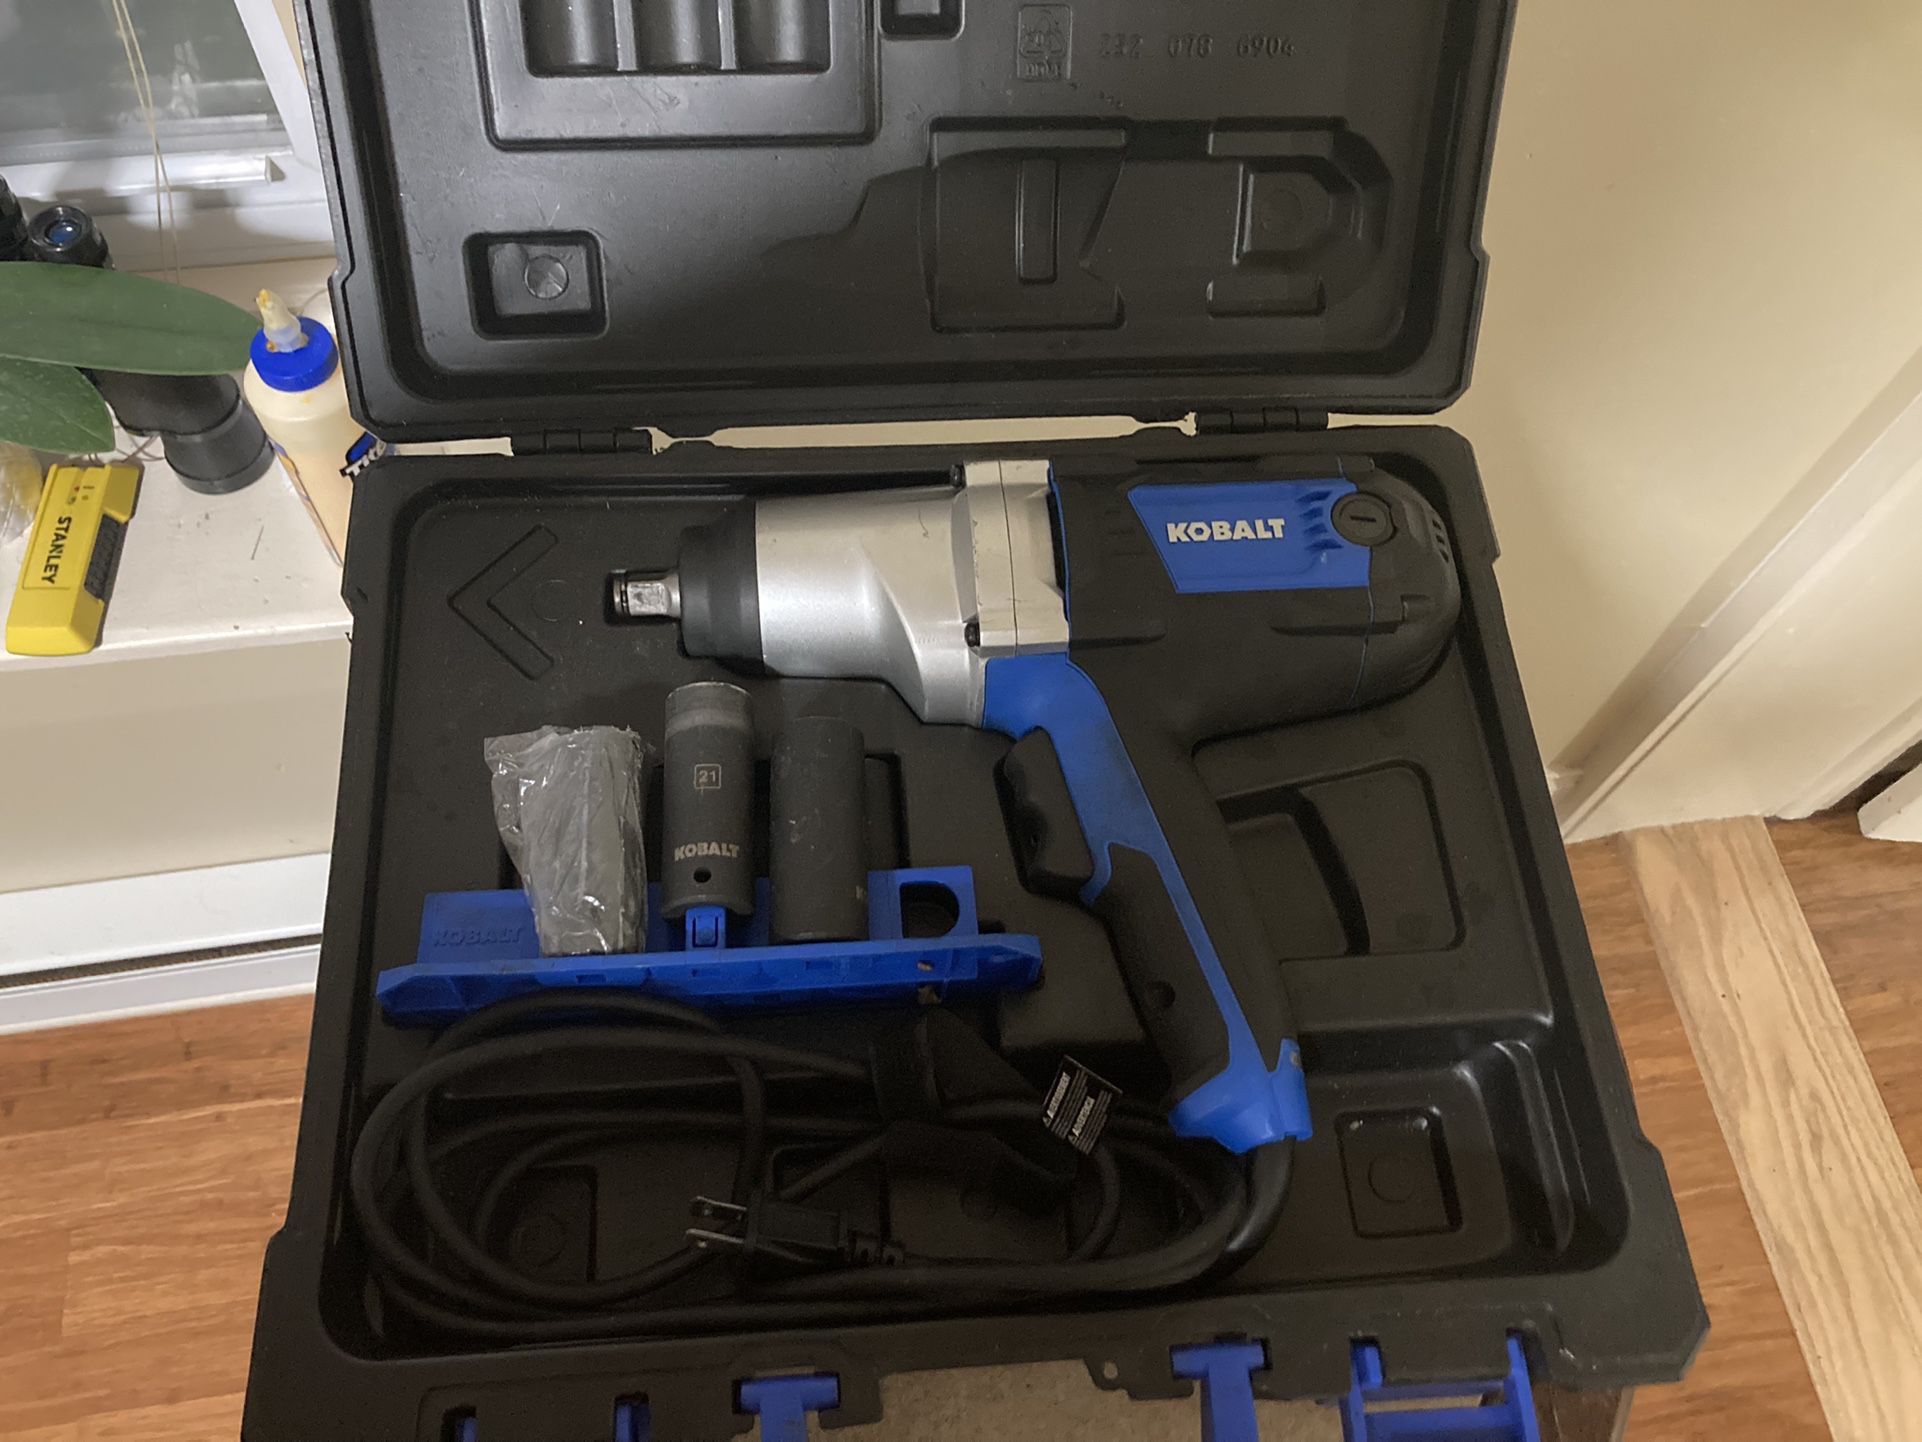 KOBALT 0028180 CORDED 8-AMP 1/2 INCH REVERSIBLE IMPACT WRENCH WITH SOCKETS CASE